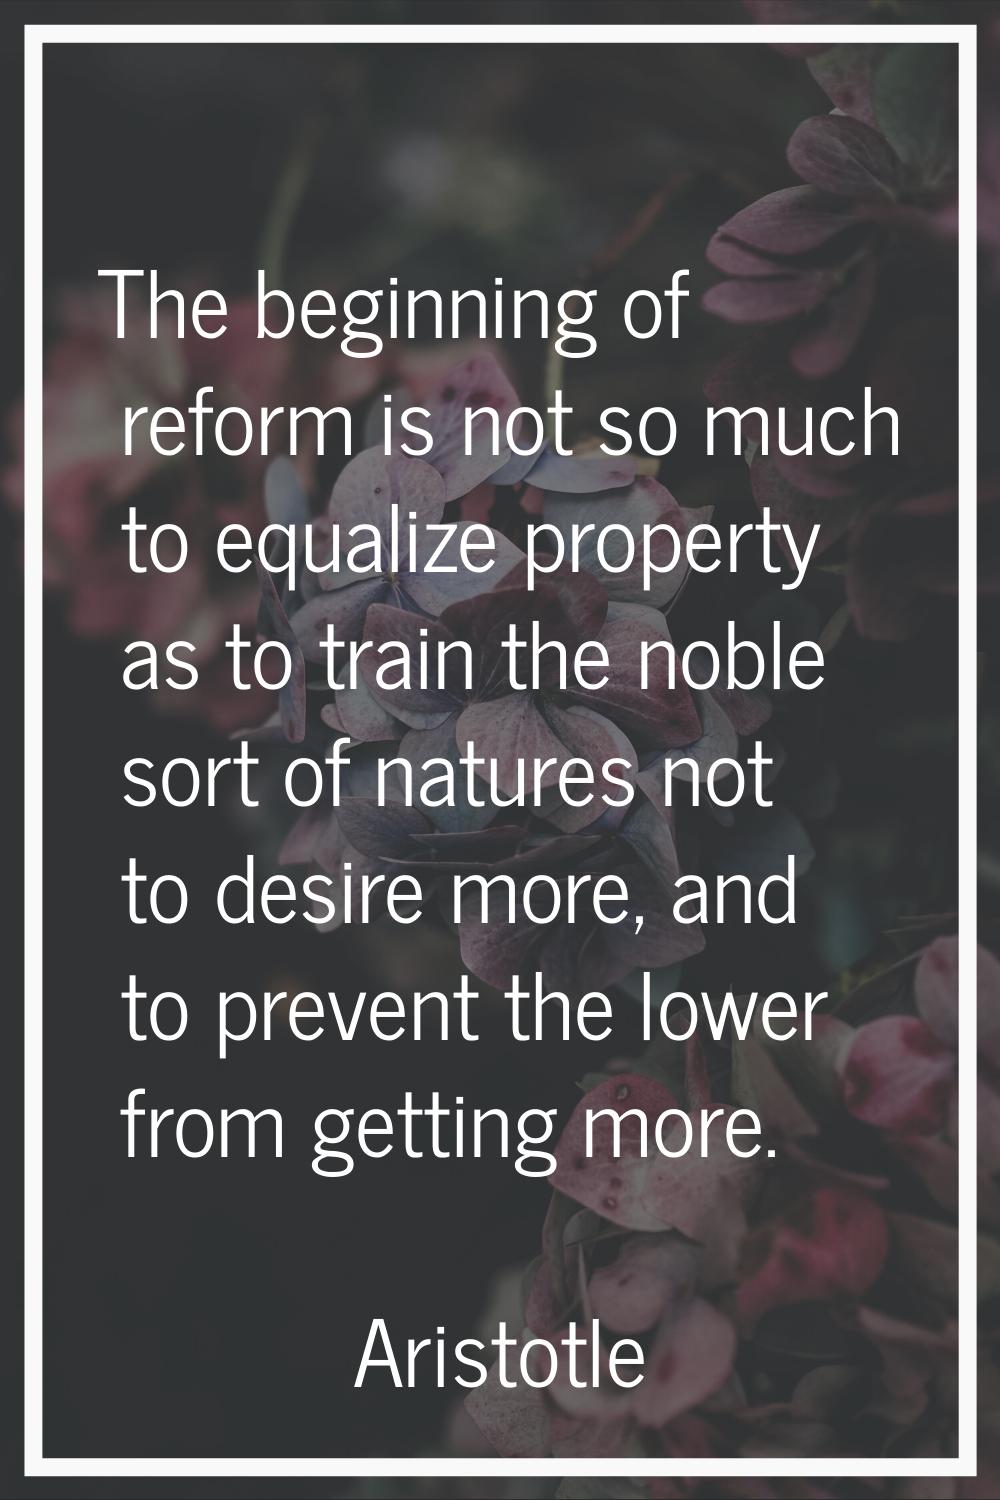 The beginning of reform is not so much to equalize property as to train the noble sort of natures n